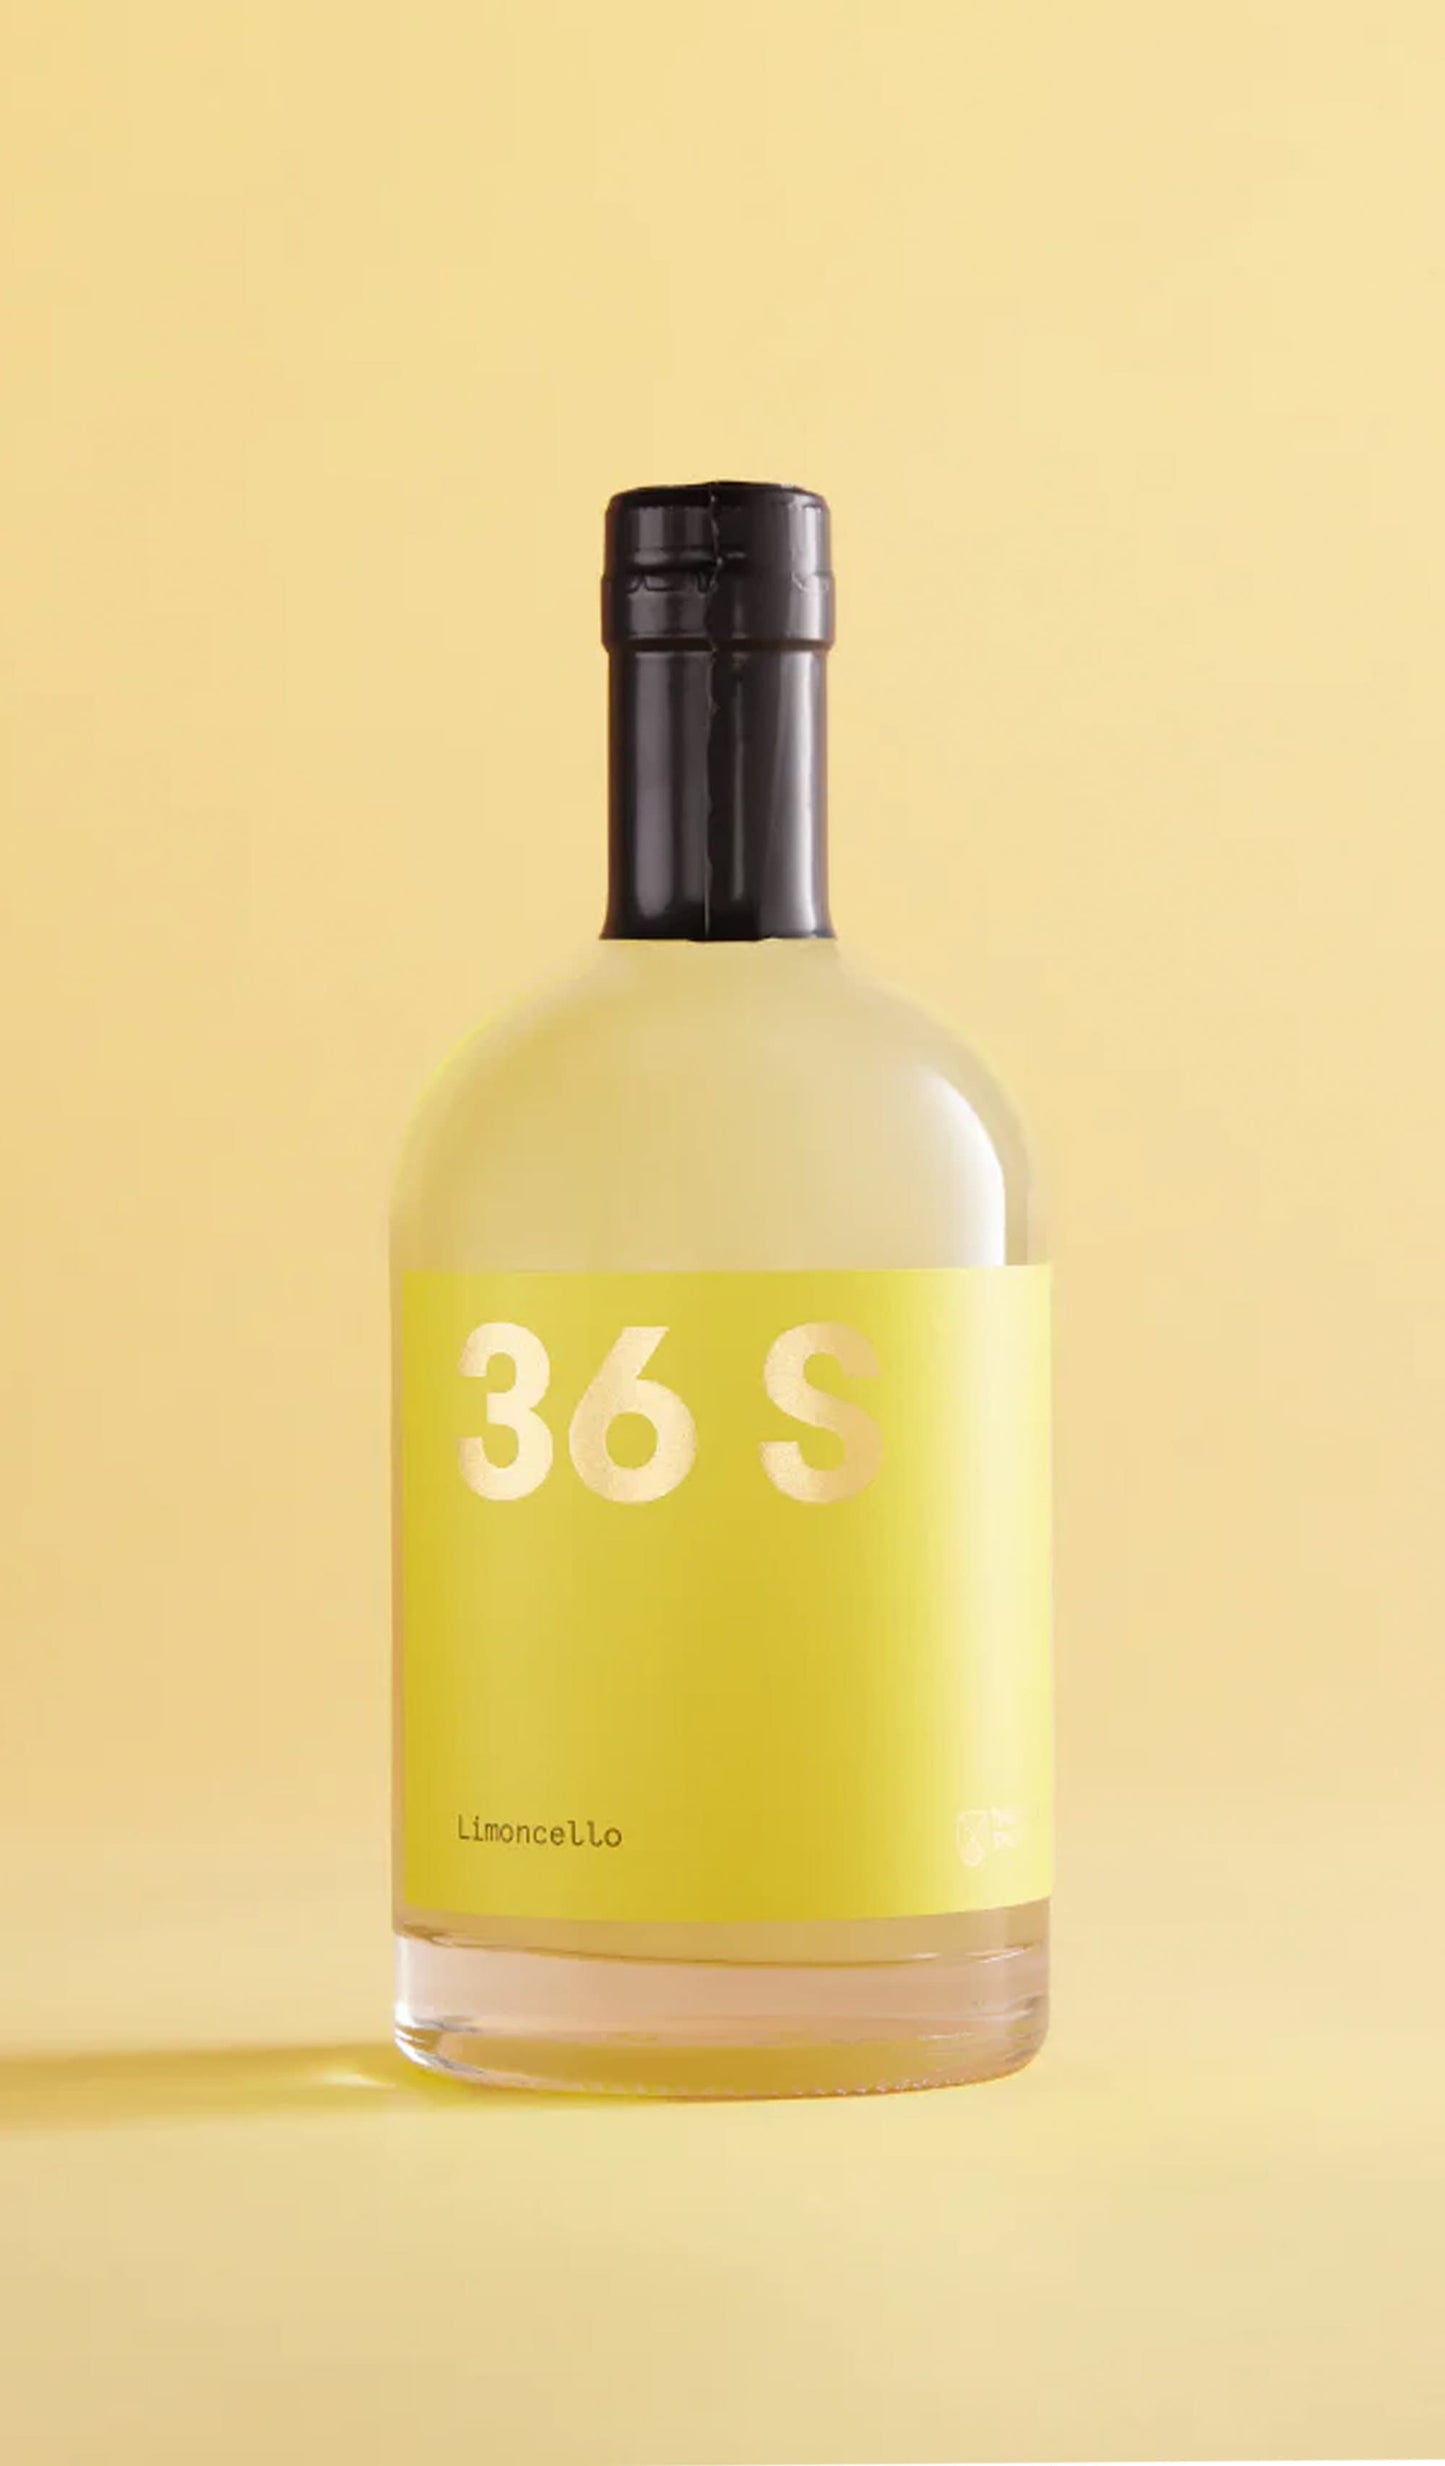 Find out more, explore the range and purchase 36 Short Limoncello 500mL available online at Wine Sellers Direct - Australia's independent liquor specialists.